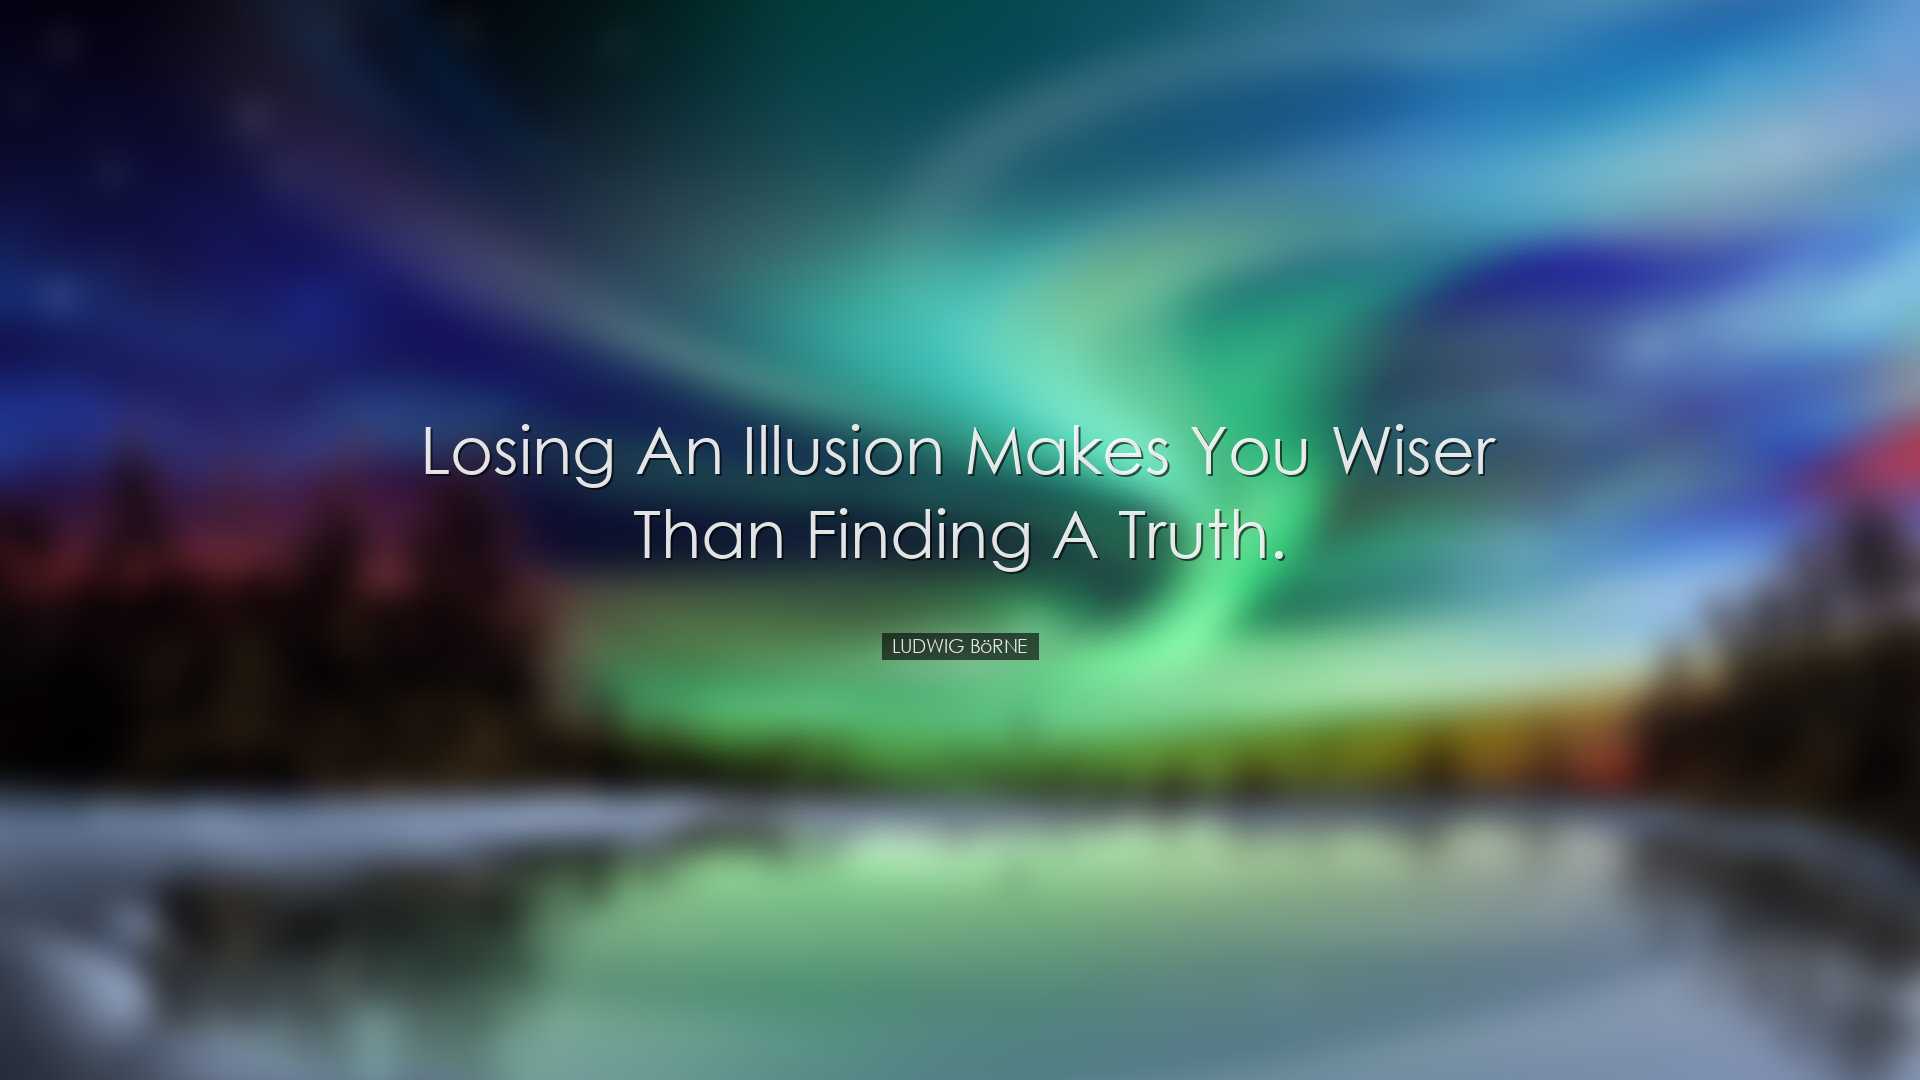 Losing an illusion makes you wiser than finding a truth. - Ludwig